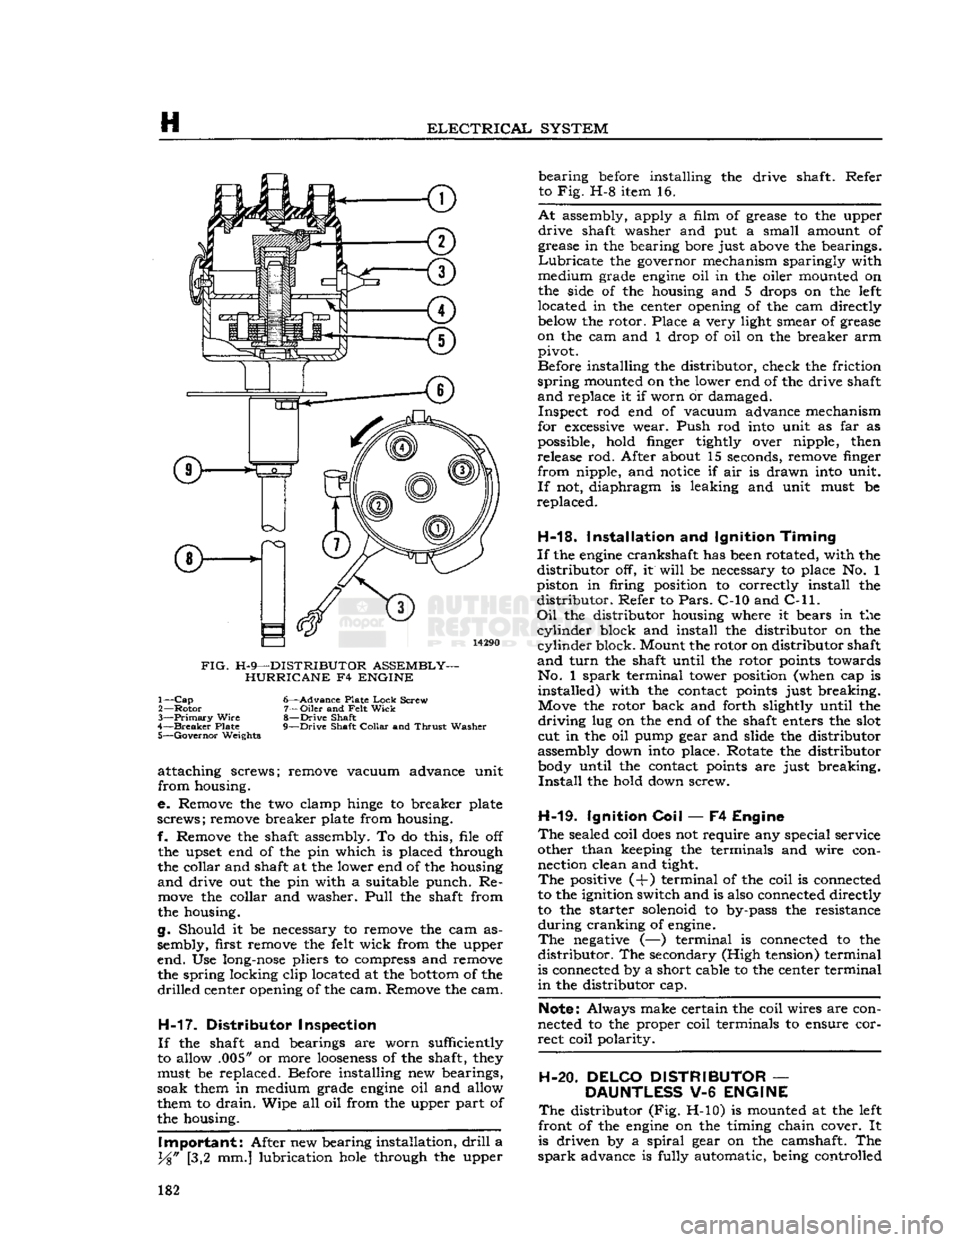 JEEP CJ 1953 Manual PDF 
H 

ELECTRICAL
 SYSTEM 
FIG.
 H-9—DISTRIBUTOR ASSEMBLY- HURRICANE F4 ENGINE  1—
 Cap
 6—Advance Plate
 Lock
 Screw 
2—
 Rotor
 7—Oiler and
 Felt
 Wick 

3—
 Primary
 Wire
 8—Drive Shaft